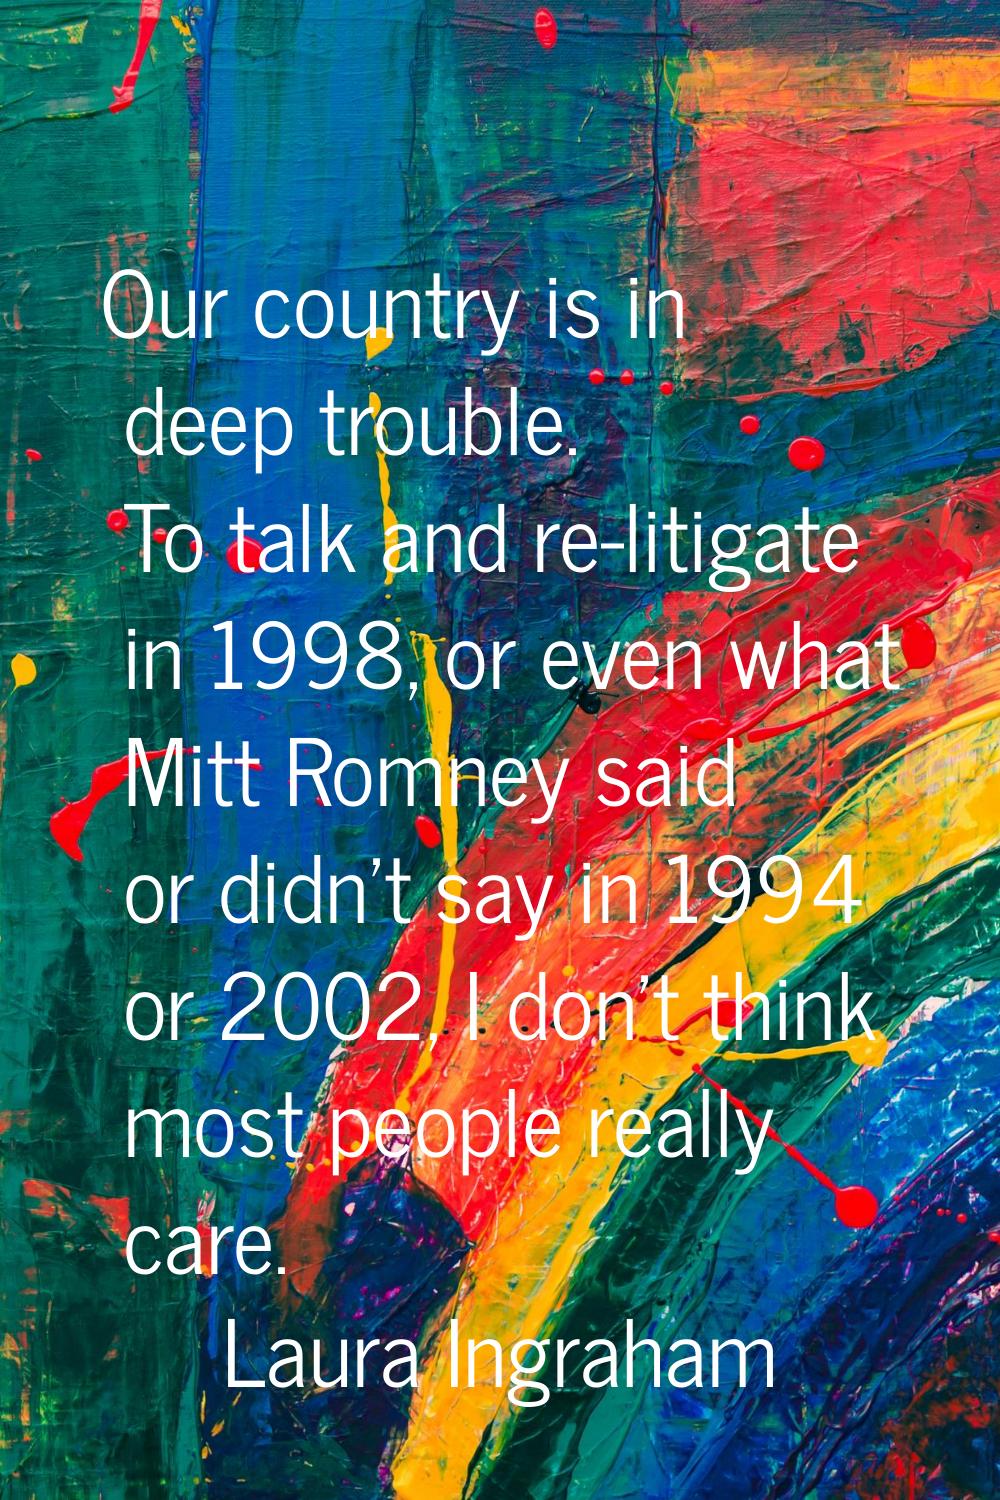 Our country is in deep trouble. To talk and re-litigate in 1998, or even what Mitt Romney said or d